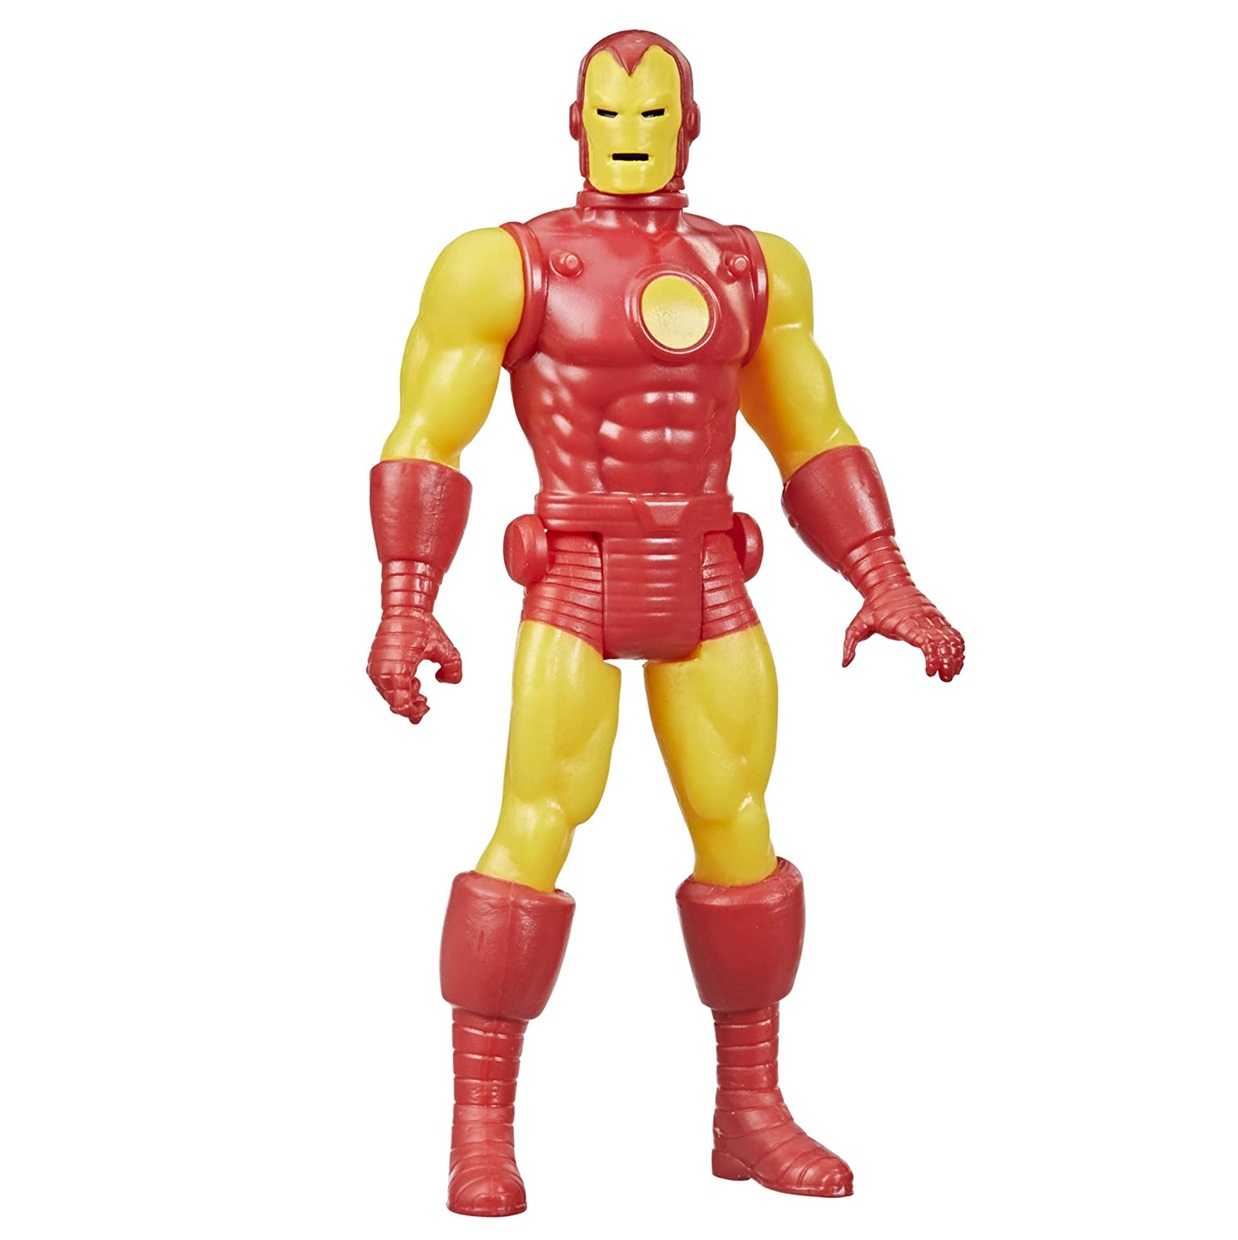 The Invincible Iron Man Vintage Figura Marvel Kenner 3 PuLG